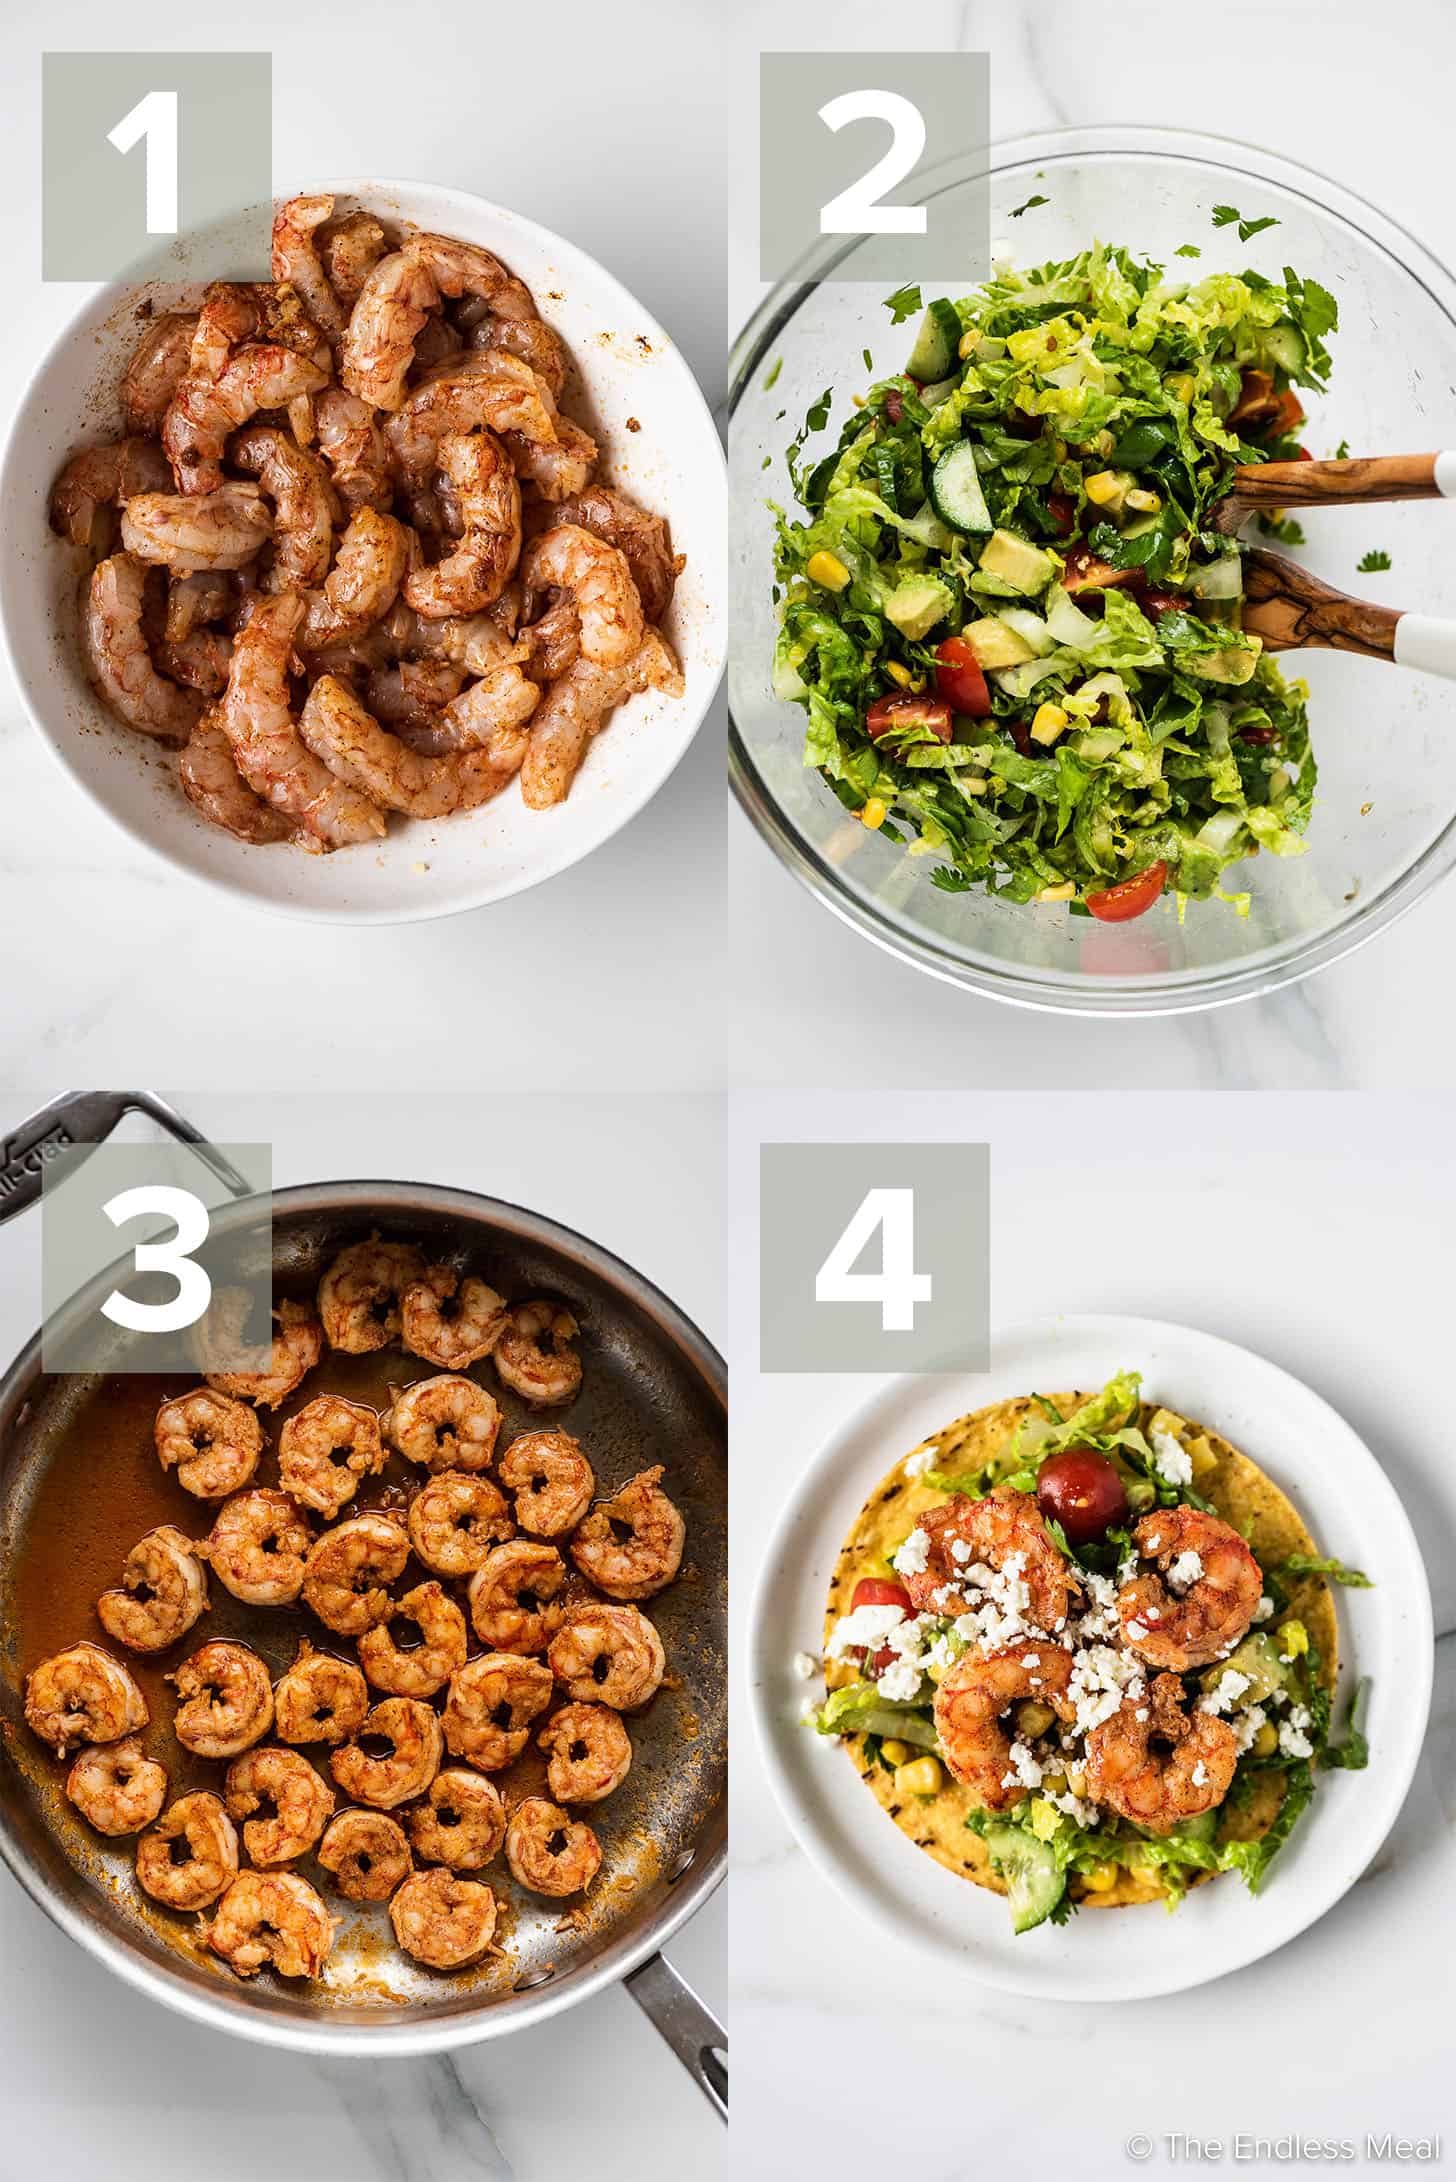 4 pictures showing how to make Shrimp Tostadas